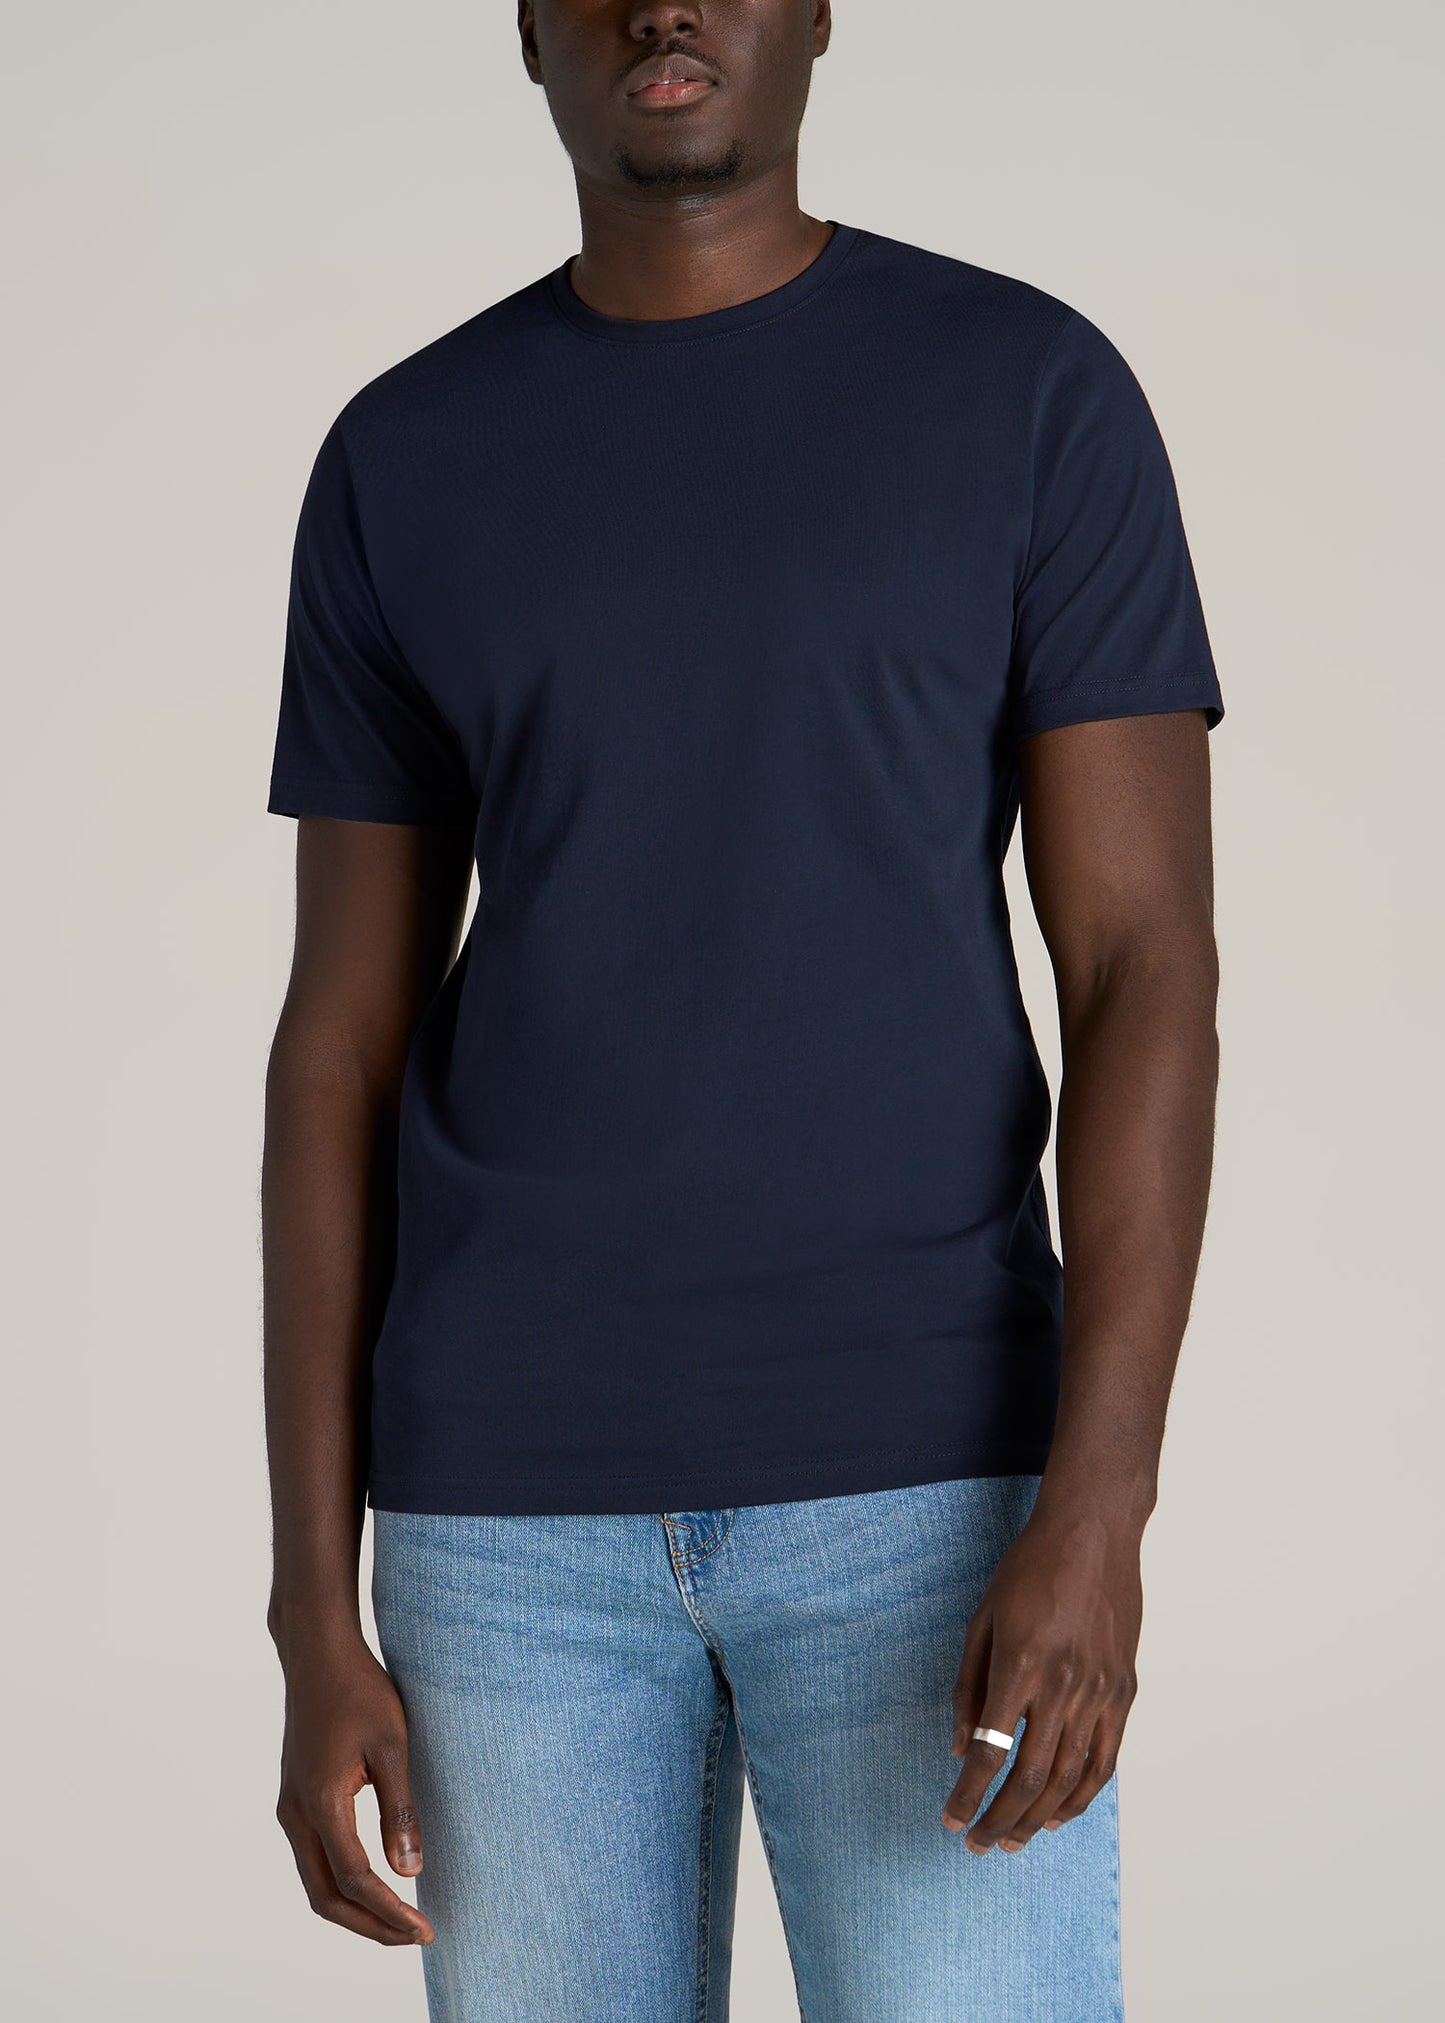 American-Tall-Men-Everyday-Cotton-Regular-Fit-Tee-Crew-Neck-Evening-Blue-front